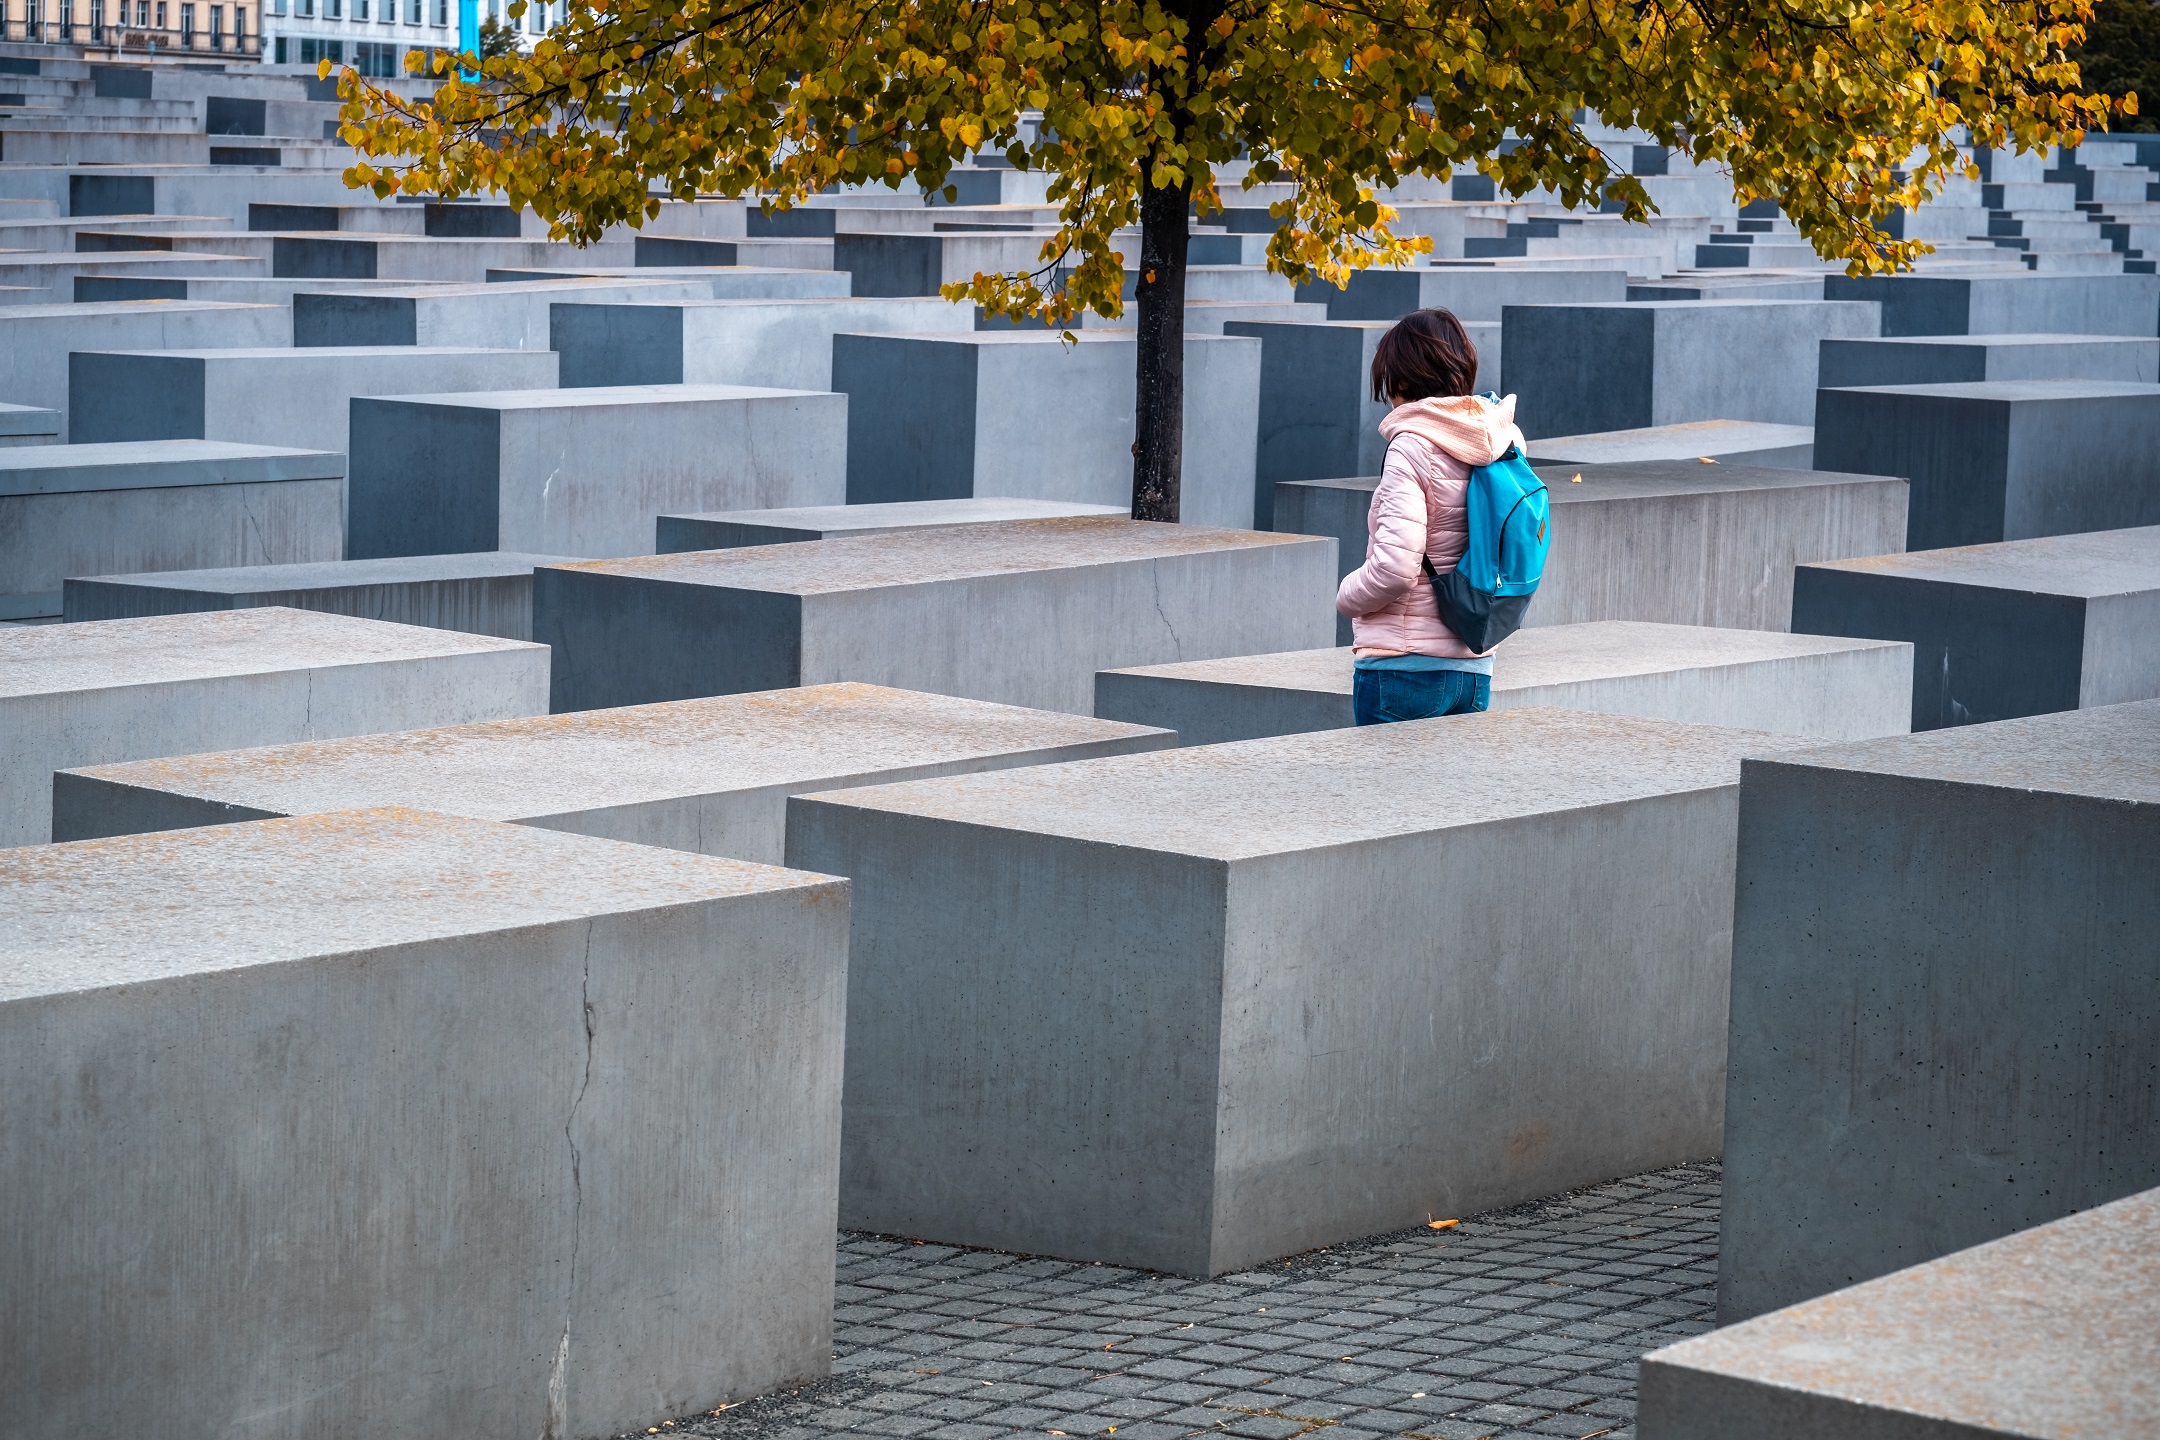 Is Germany Ending Its ‘Culture of Memory’ of the Holocaust?